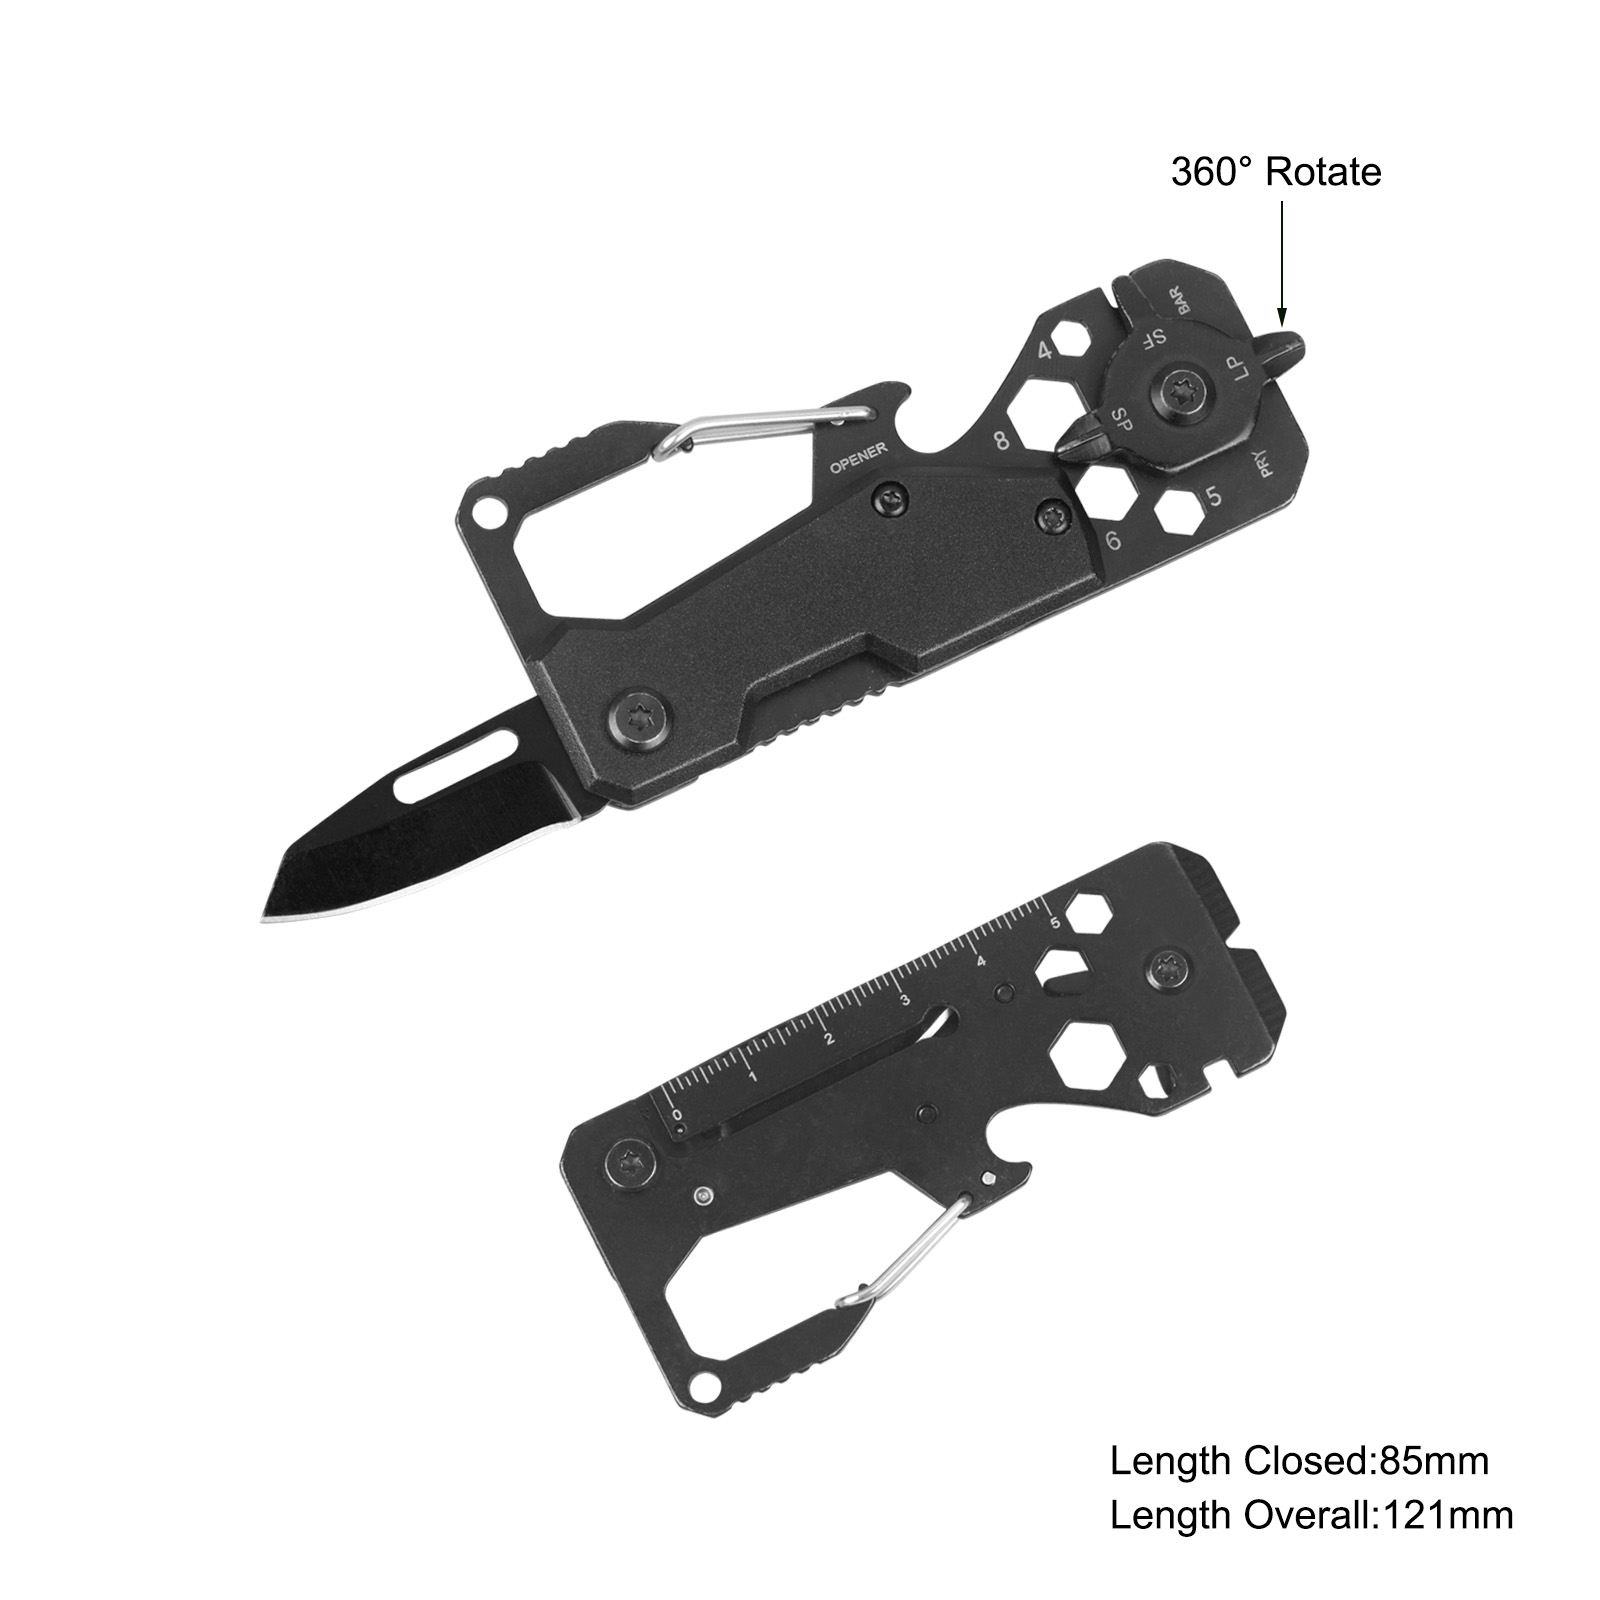 #6312 Multi Function Tool with Carabiner